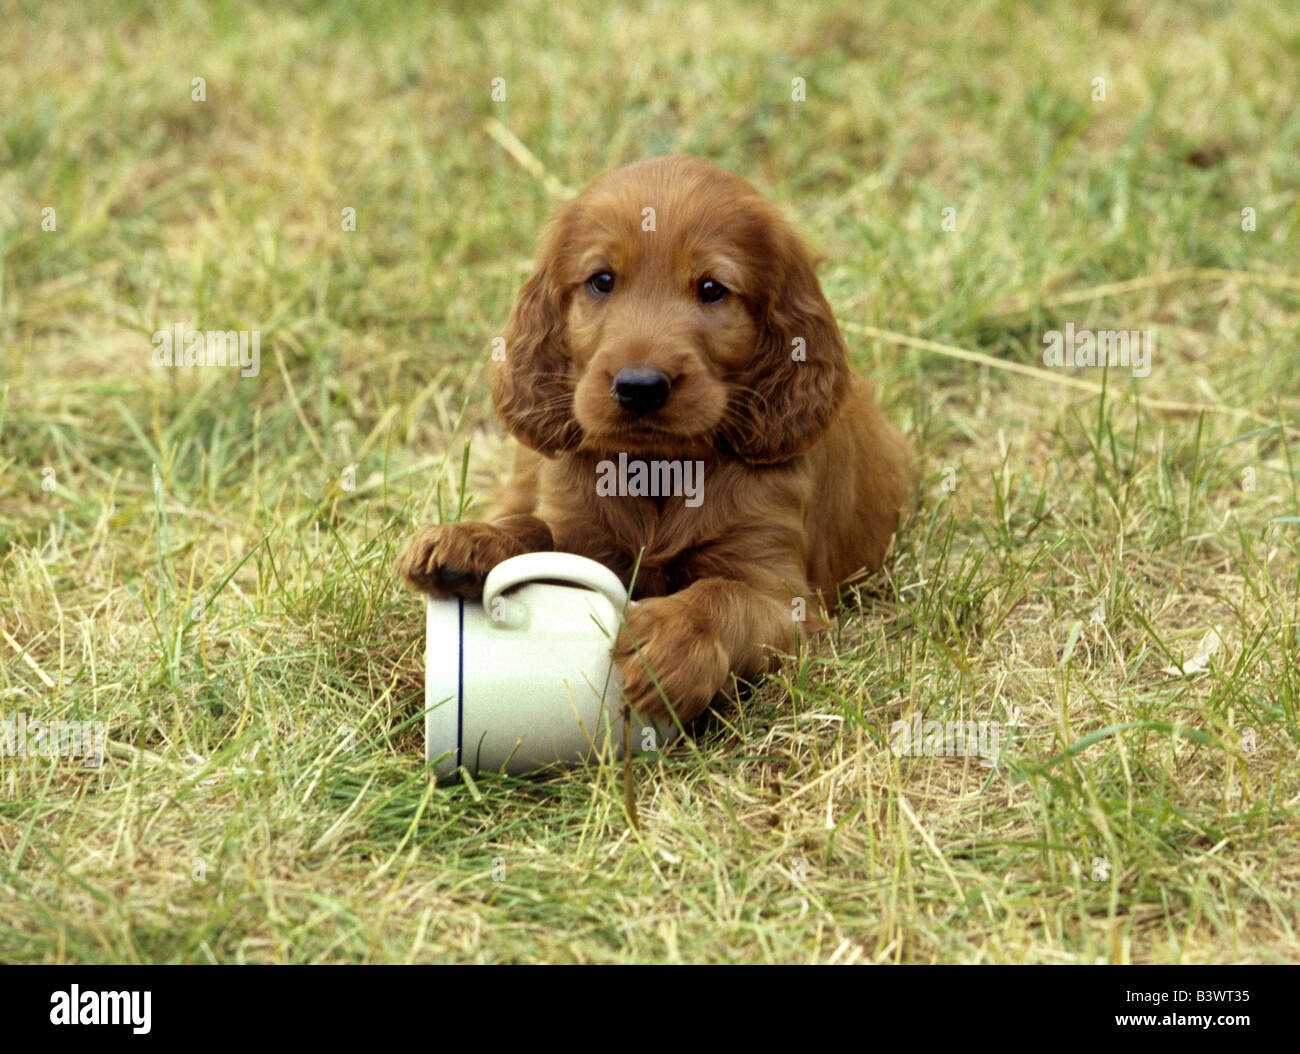 Irish Setter puppy playing with a cup Stock Photo